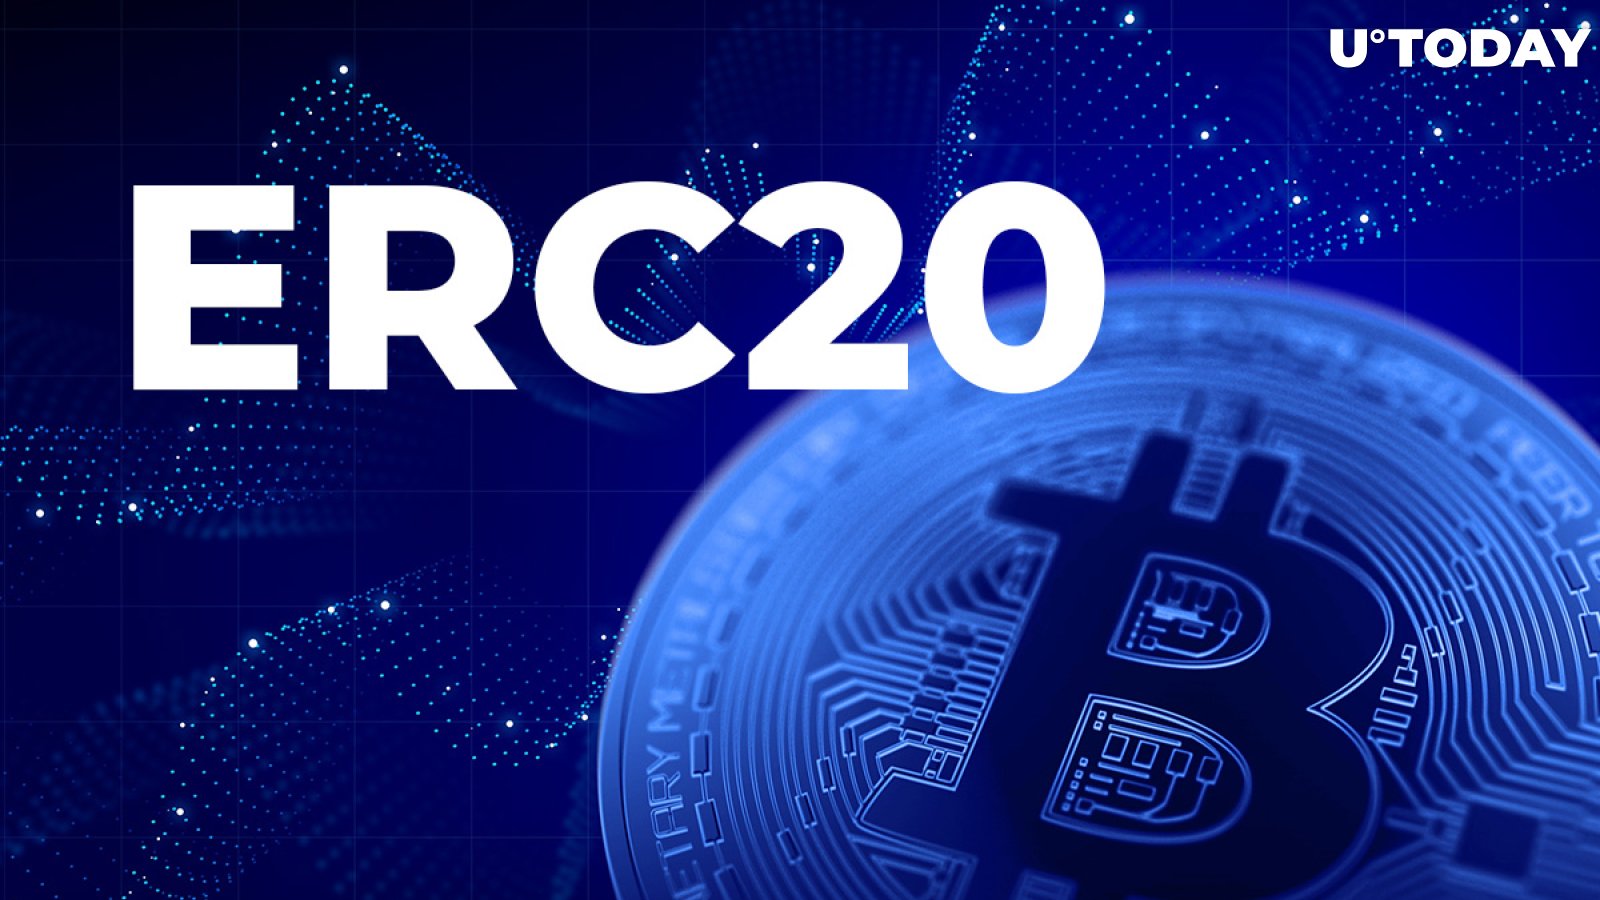 Despite Fall in Bitcoin Price, ERC20 Based Projects Show High Activity - Santiment